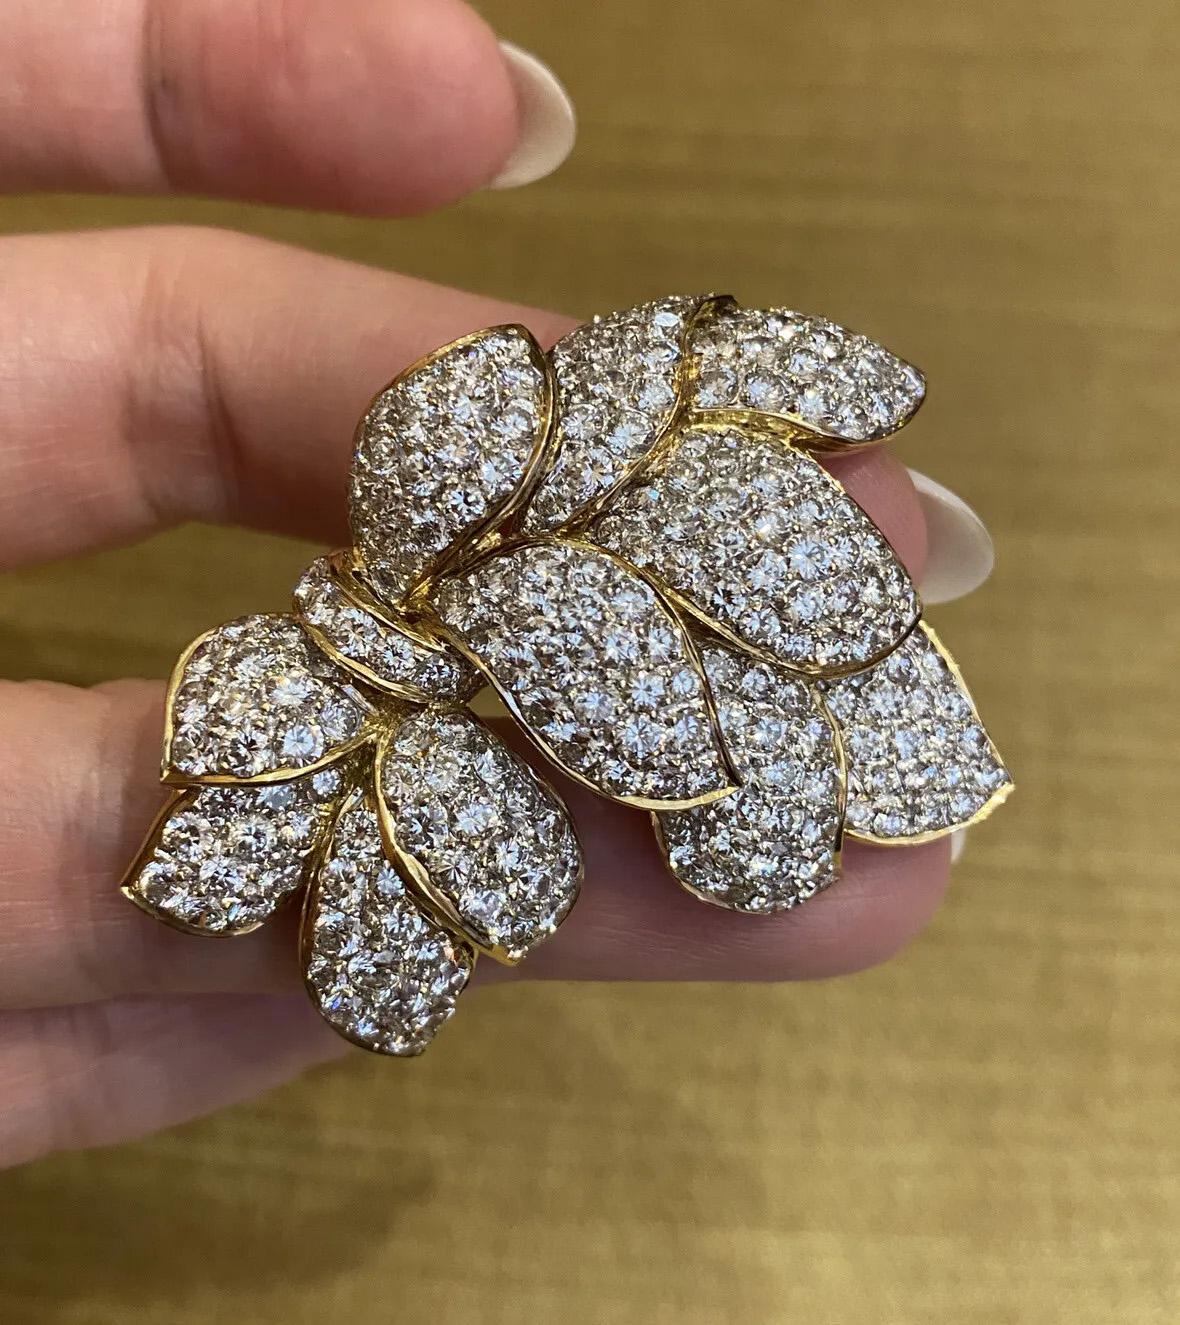 Pave Diamond Floral Spray Pin Brooch 10.86 carat total weight in 18k Yellow Gold

Diamond Flower Spray Brooch features overlapping petals of Pave set Round Brilliant Diamonds set in 18k Yellow Gold. Brooch is secured by a double bar clasp with